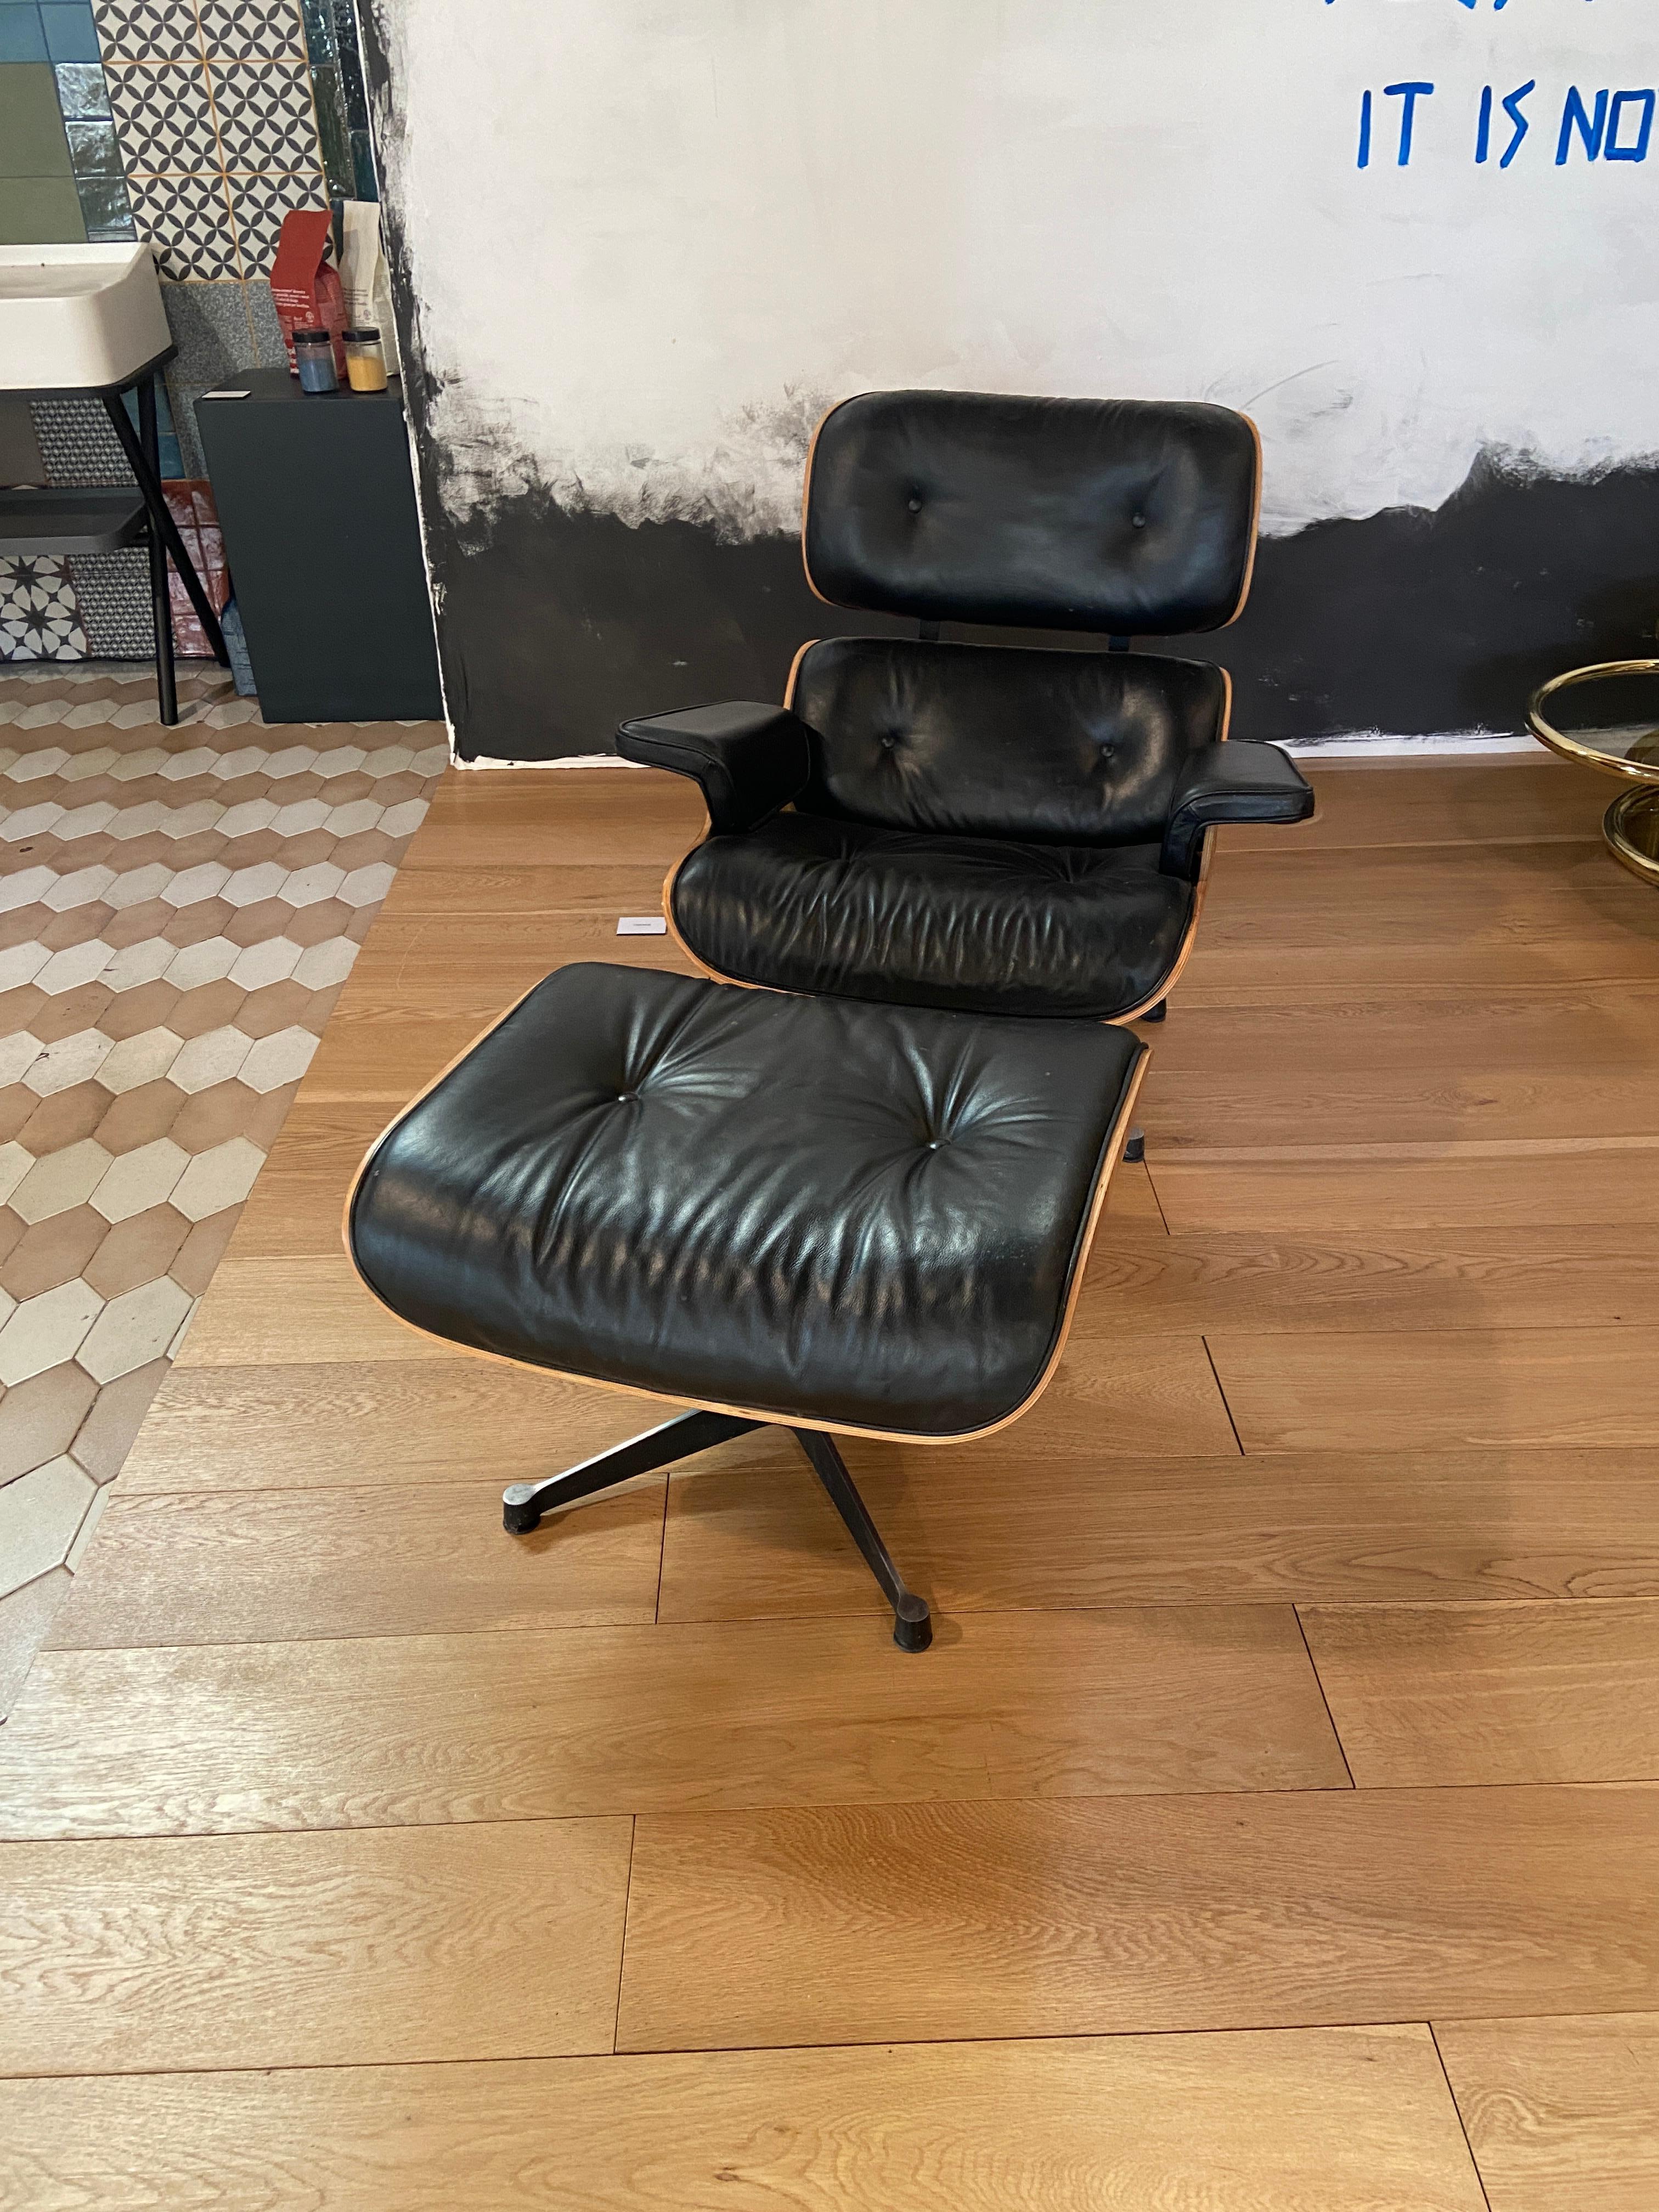 Vintage Eames style lounge chair with its ottoman.
Size: Lounge chair: cm. 89 x 81 x H 83 (seat height cm.38)
Ottoman: cm. 66 x 56 x H 40.